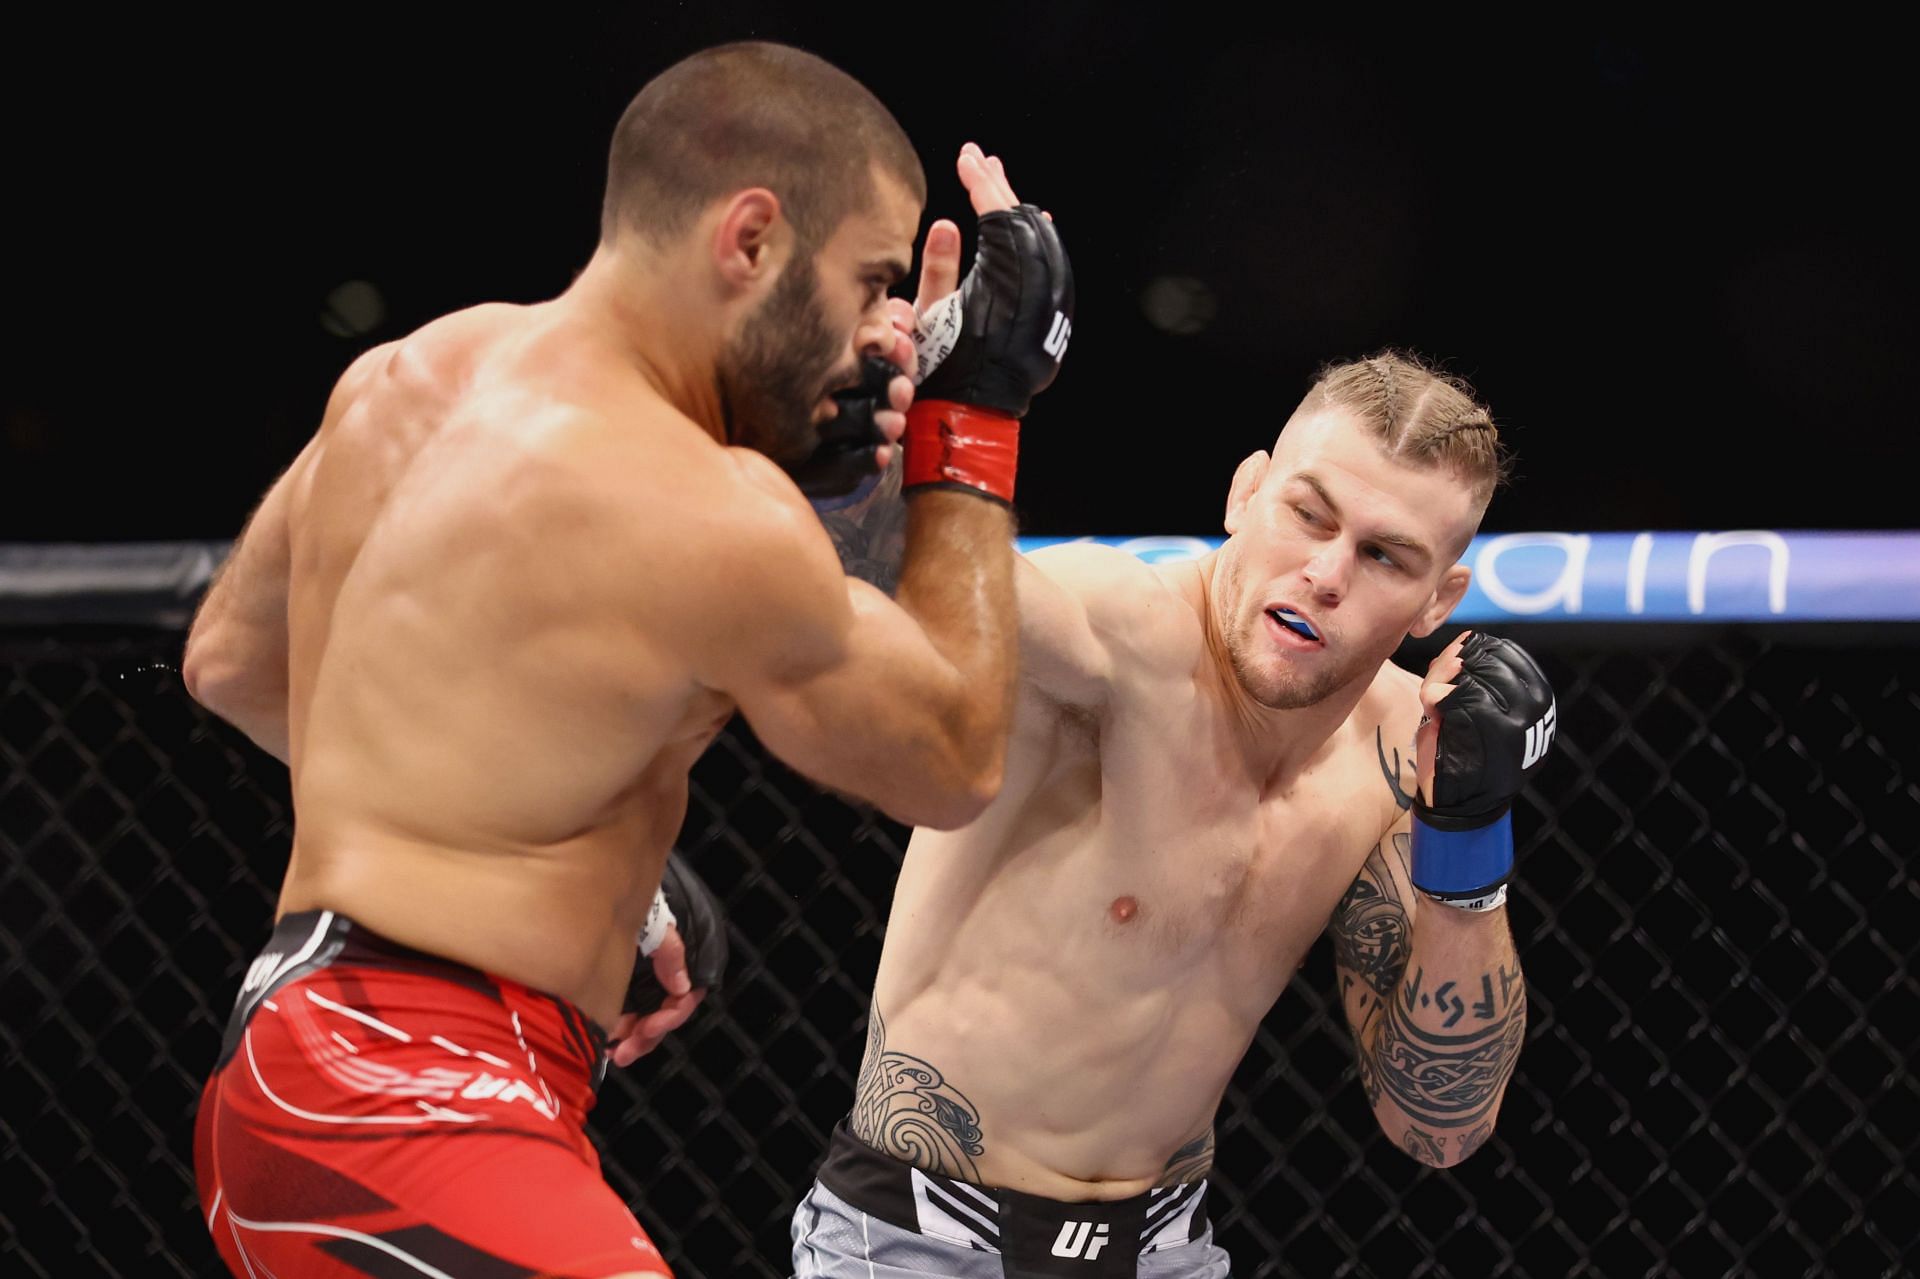 Jake Matthews is still young enough to achieve greatness in the octagon